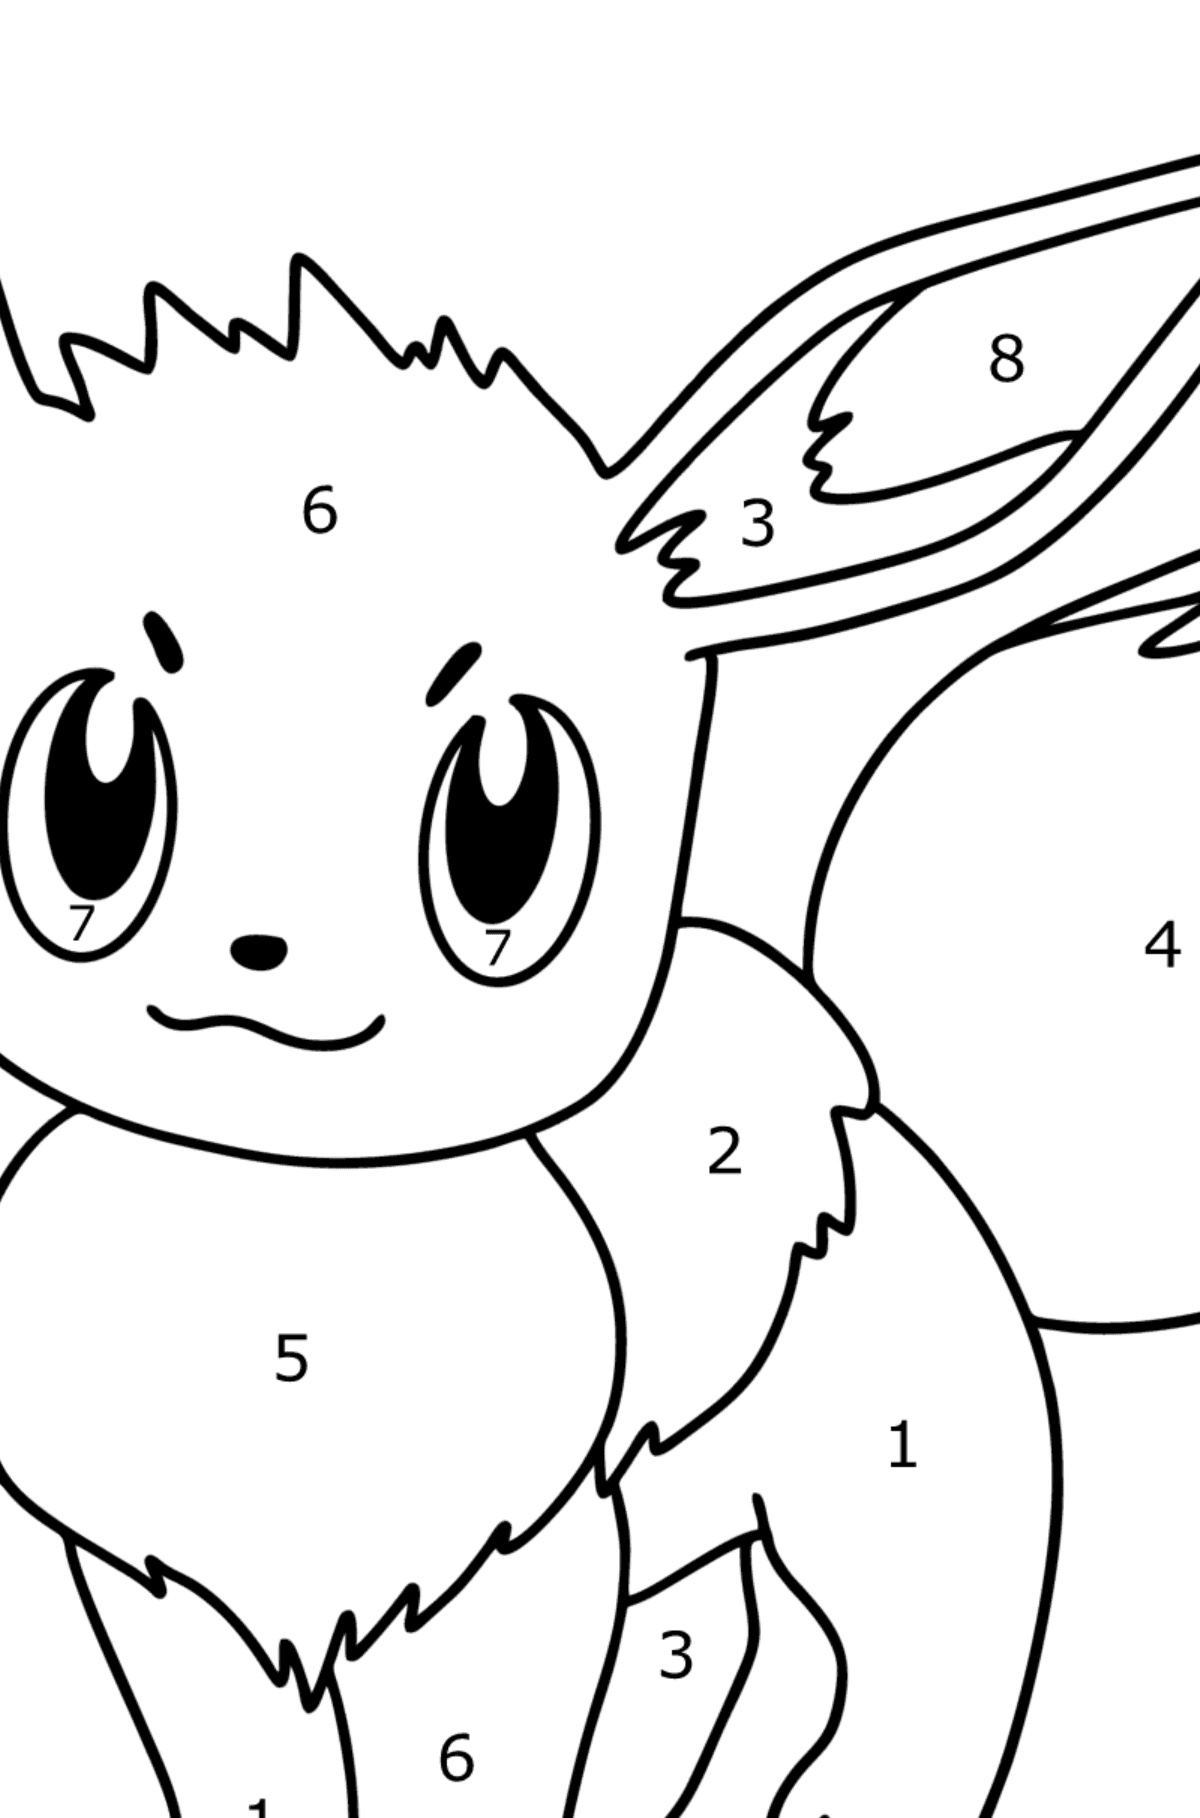 Pokemon Go Eevee coloring page - Coloring by Numbers for Kids